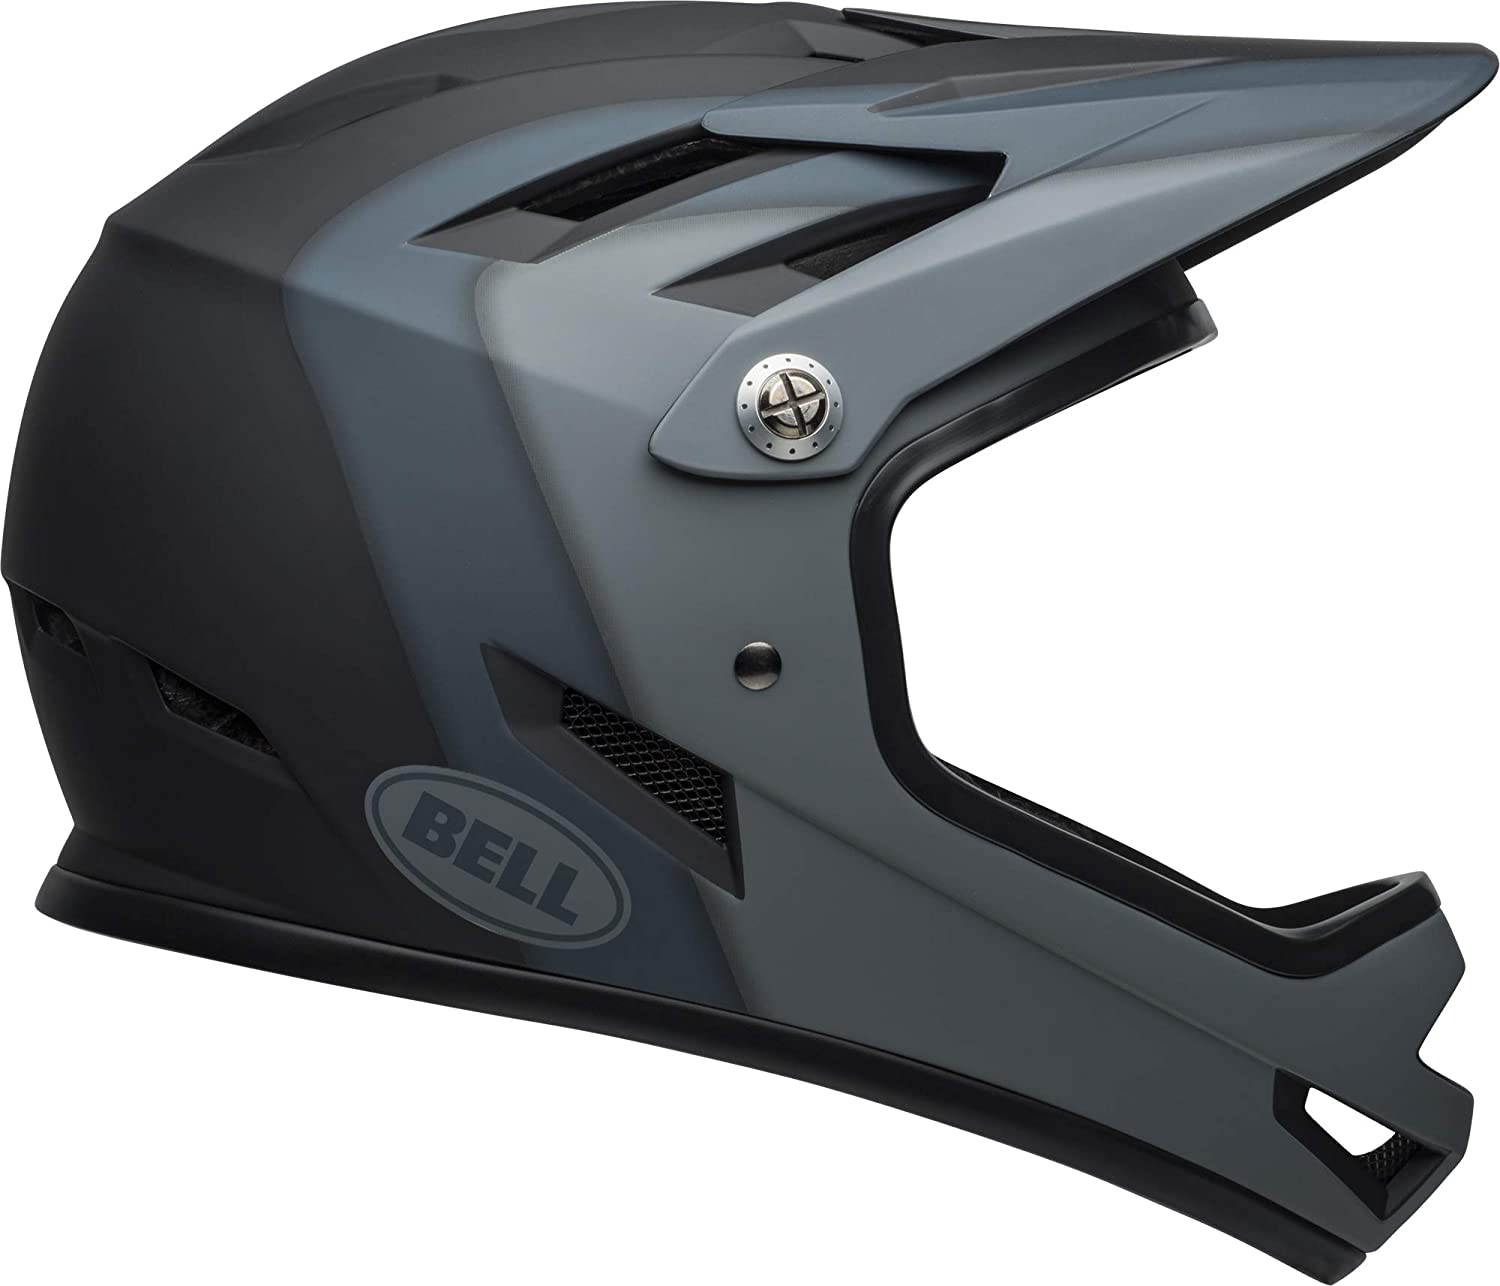 This type of helmet would make the perfect mountain bike body armor upgrade.